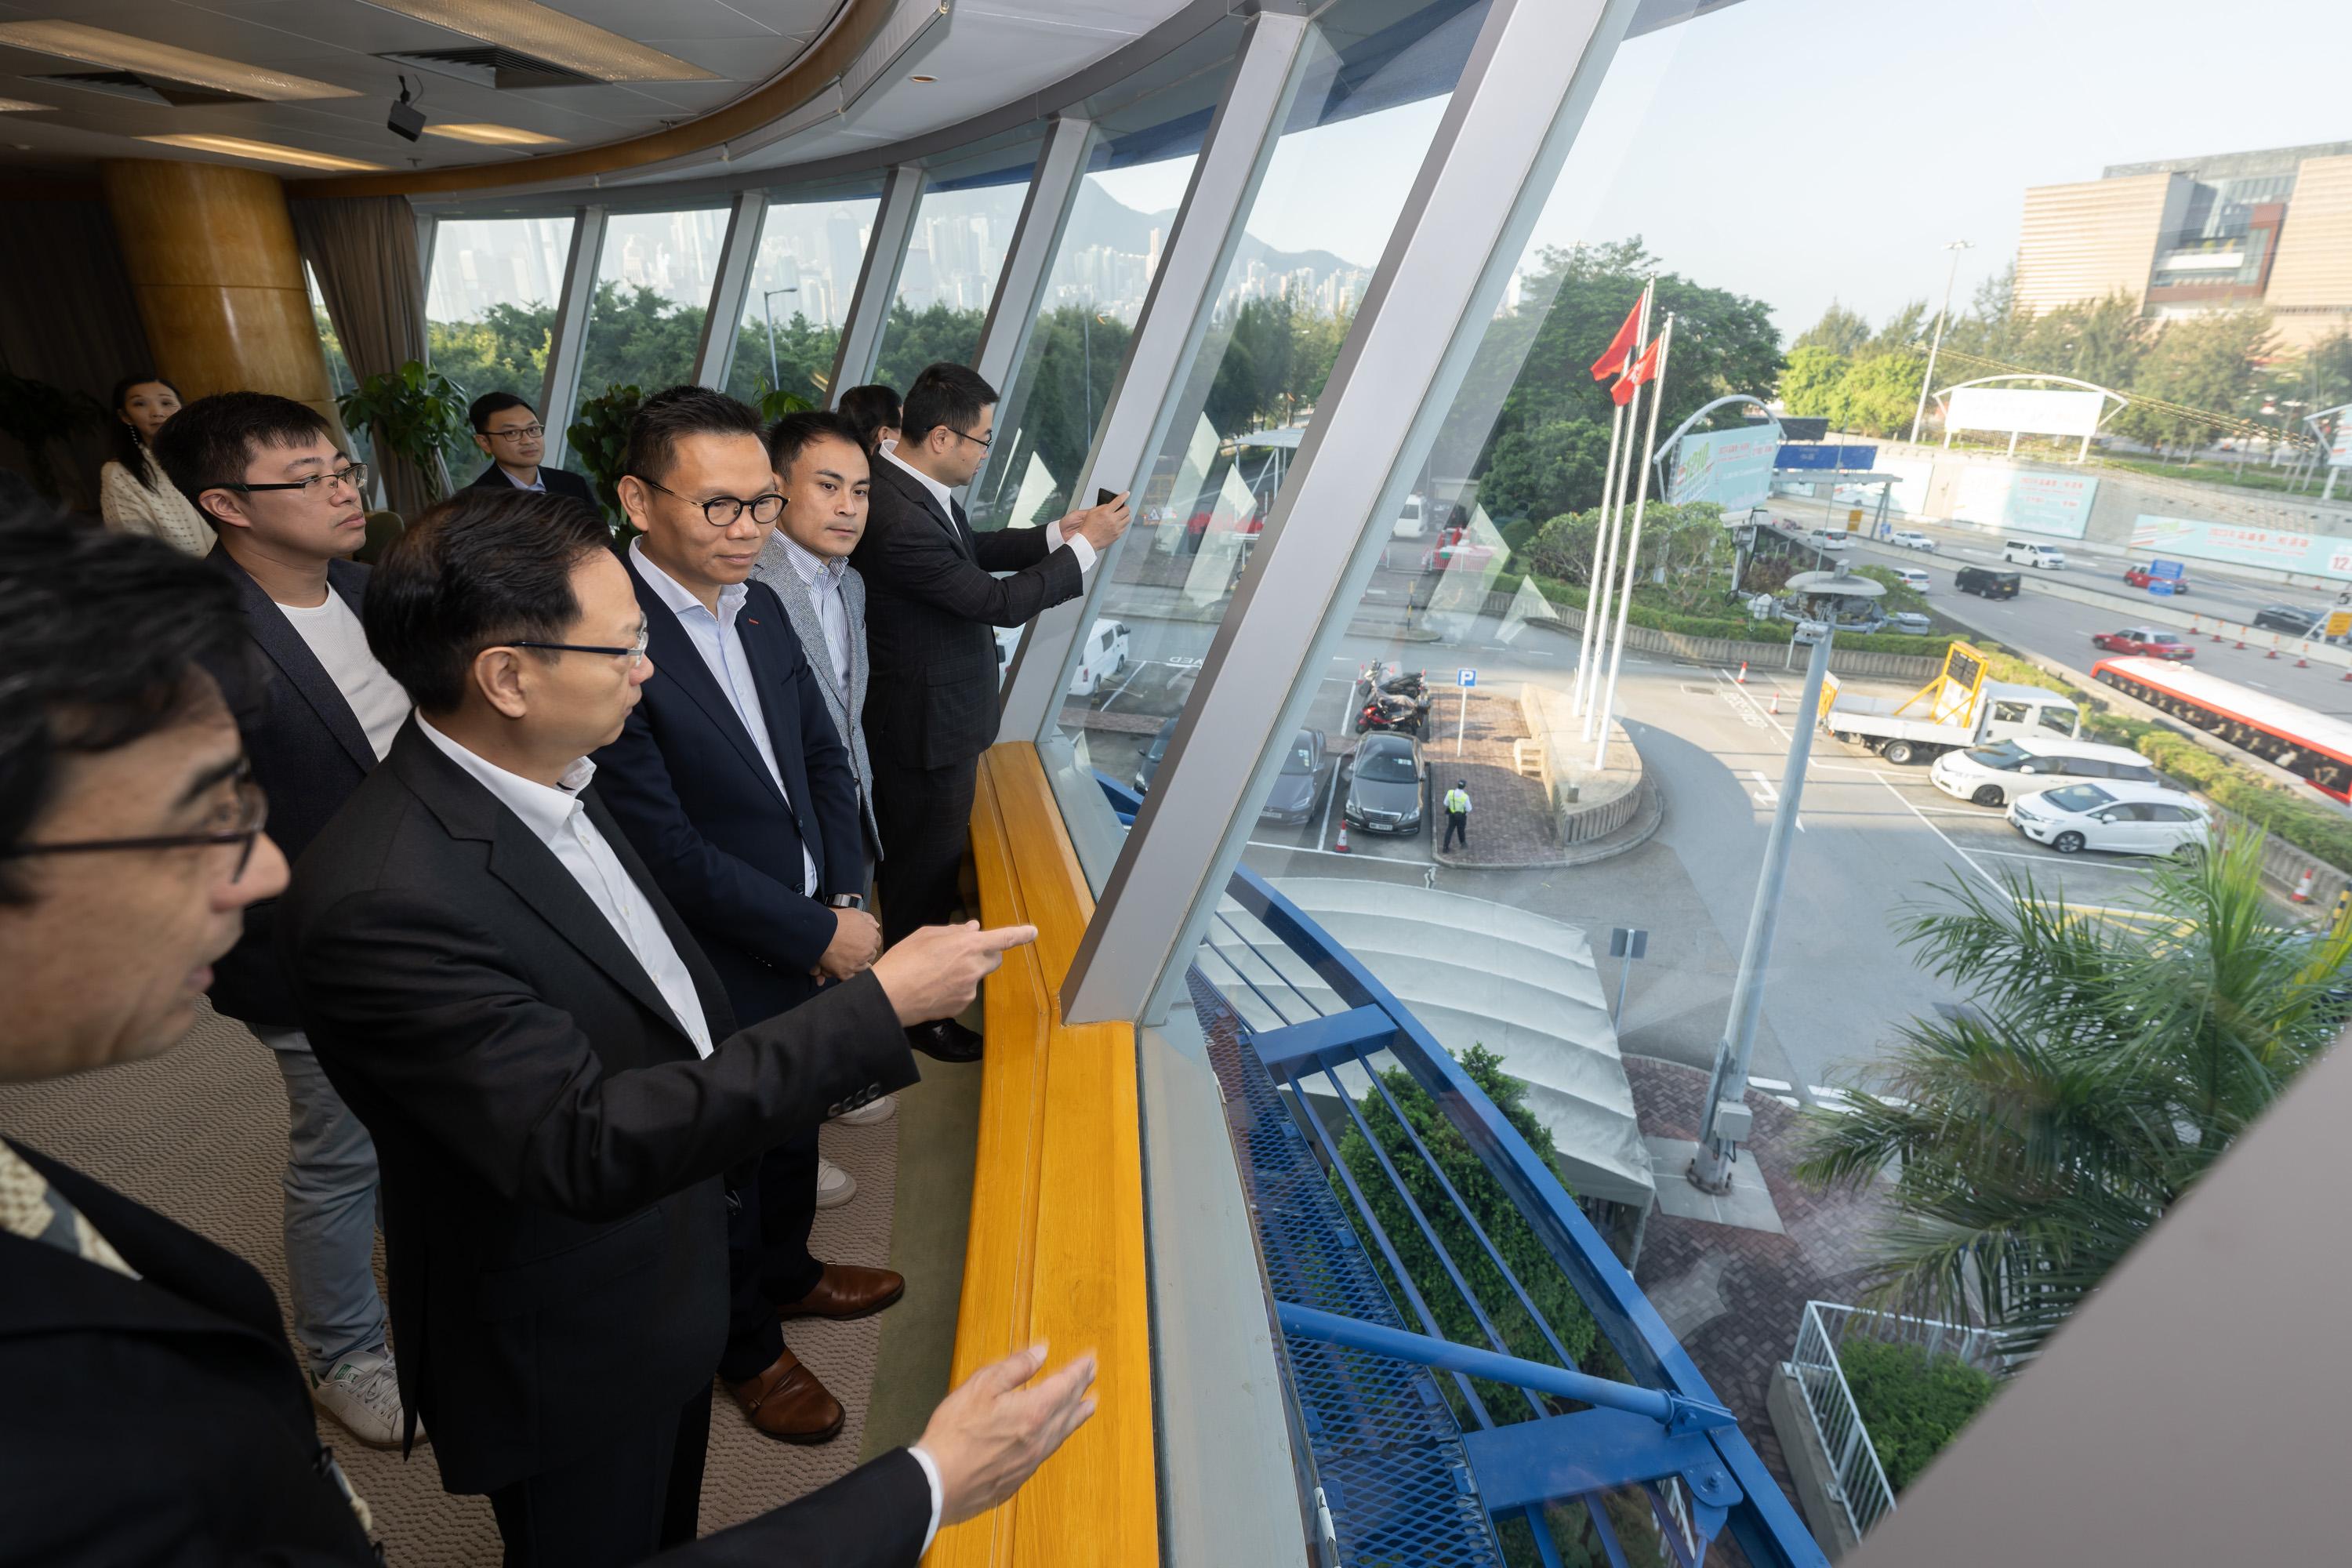 The Legislative Council (LegCo) Panel on Transport today (November 27) visited the Administration Building of Western Harbour Crossing to get a better grasp on the readiness of time-varying tolls implementation at the three road harbour crossings.